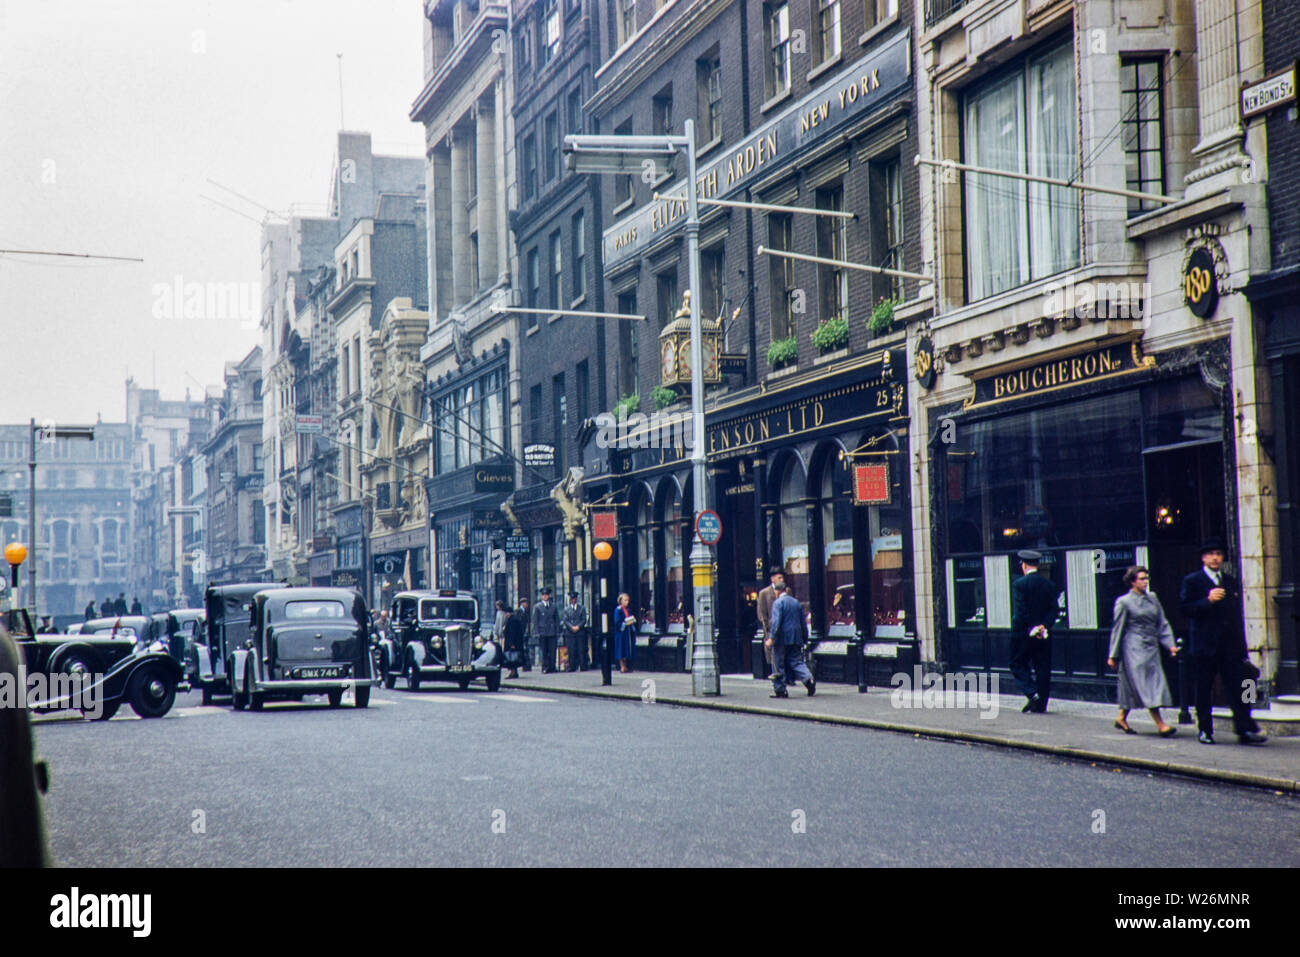 New Bond Street in the 1950s, the image shows the Jewellers J W Benson Ltd along with an advertisement for Elizabeth Arden above the shop frontage. The Hackney carriage (London Black Cab Taxi) is also visible in an earlier incarnation Beardmores and Austin FX3 were the main vehicles of the day. Stock Photo